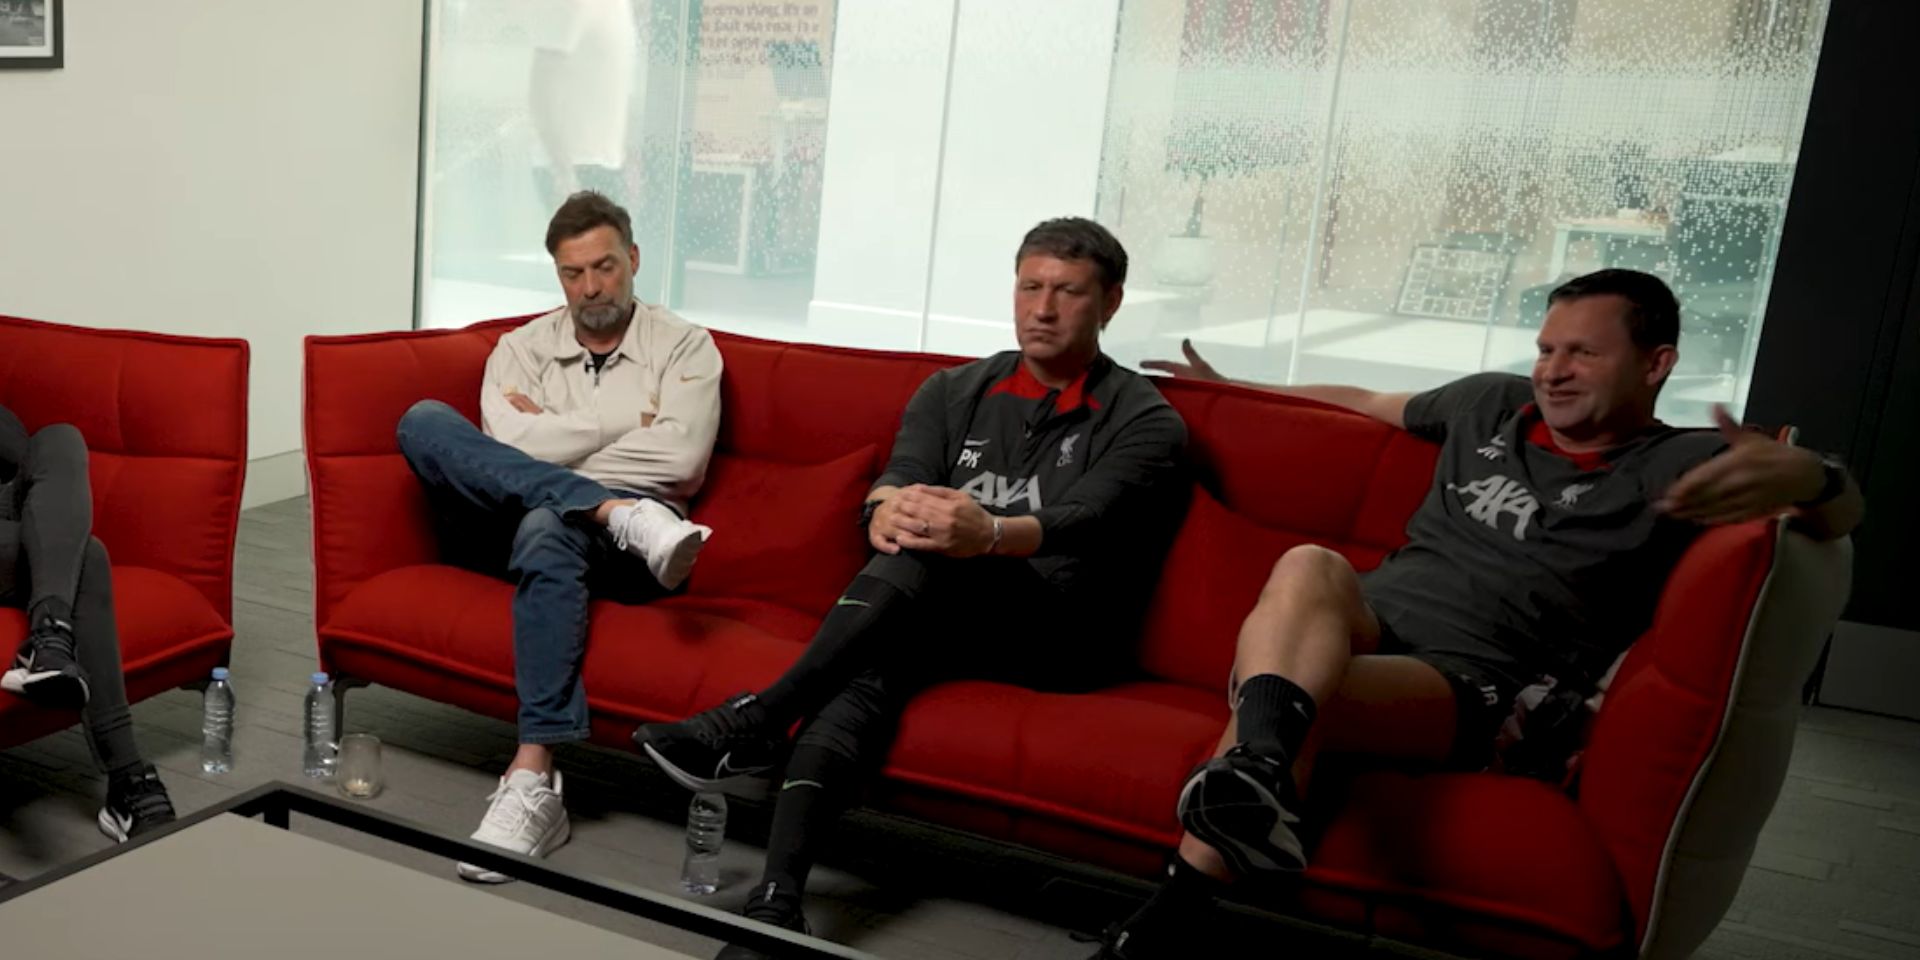 (Video) Watch the crazy Alisson coincidence that occurred during Klopp interview